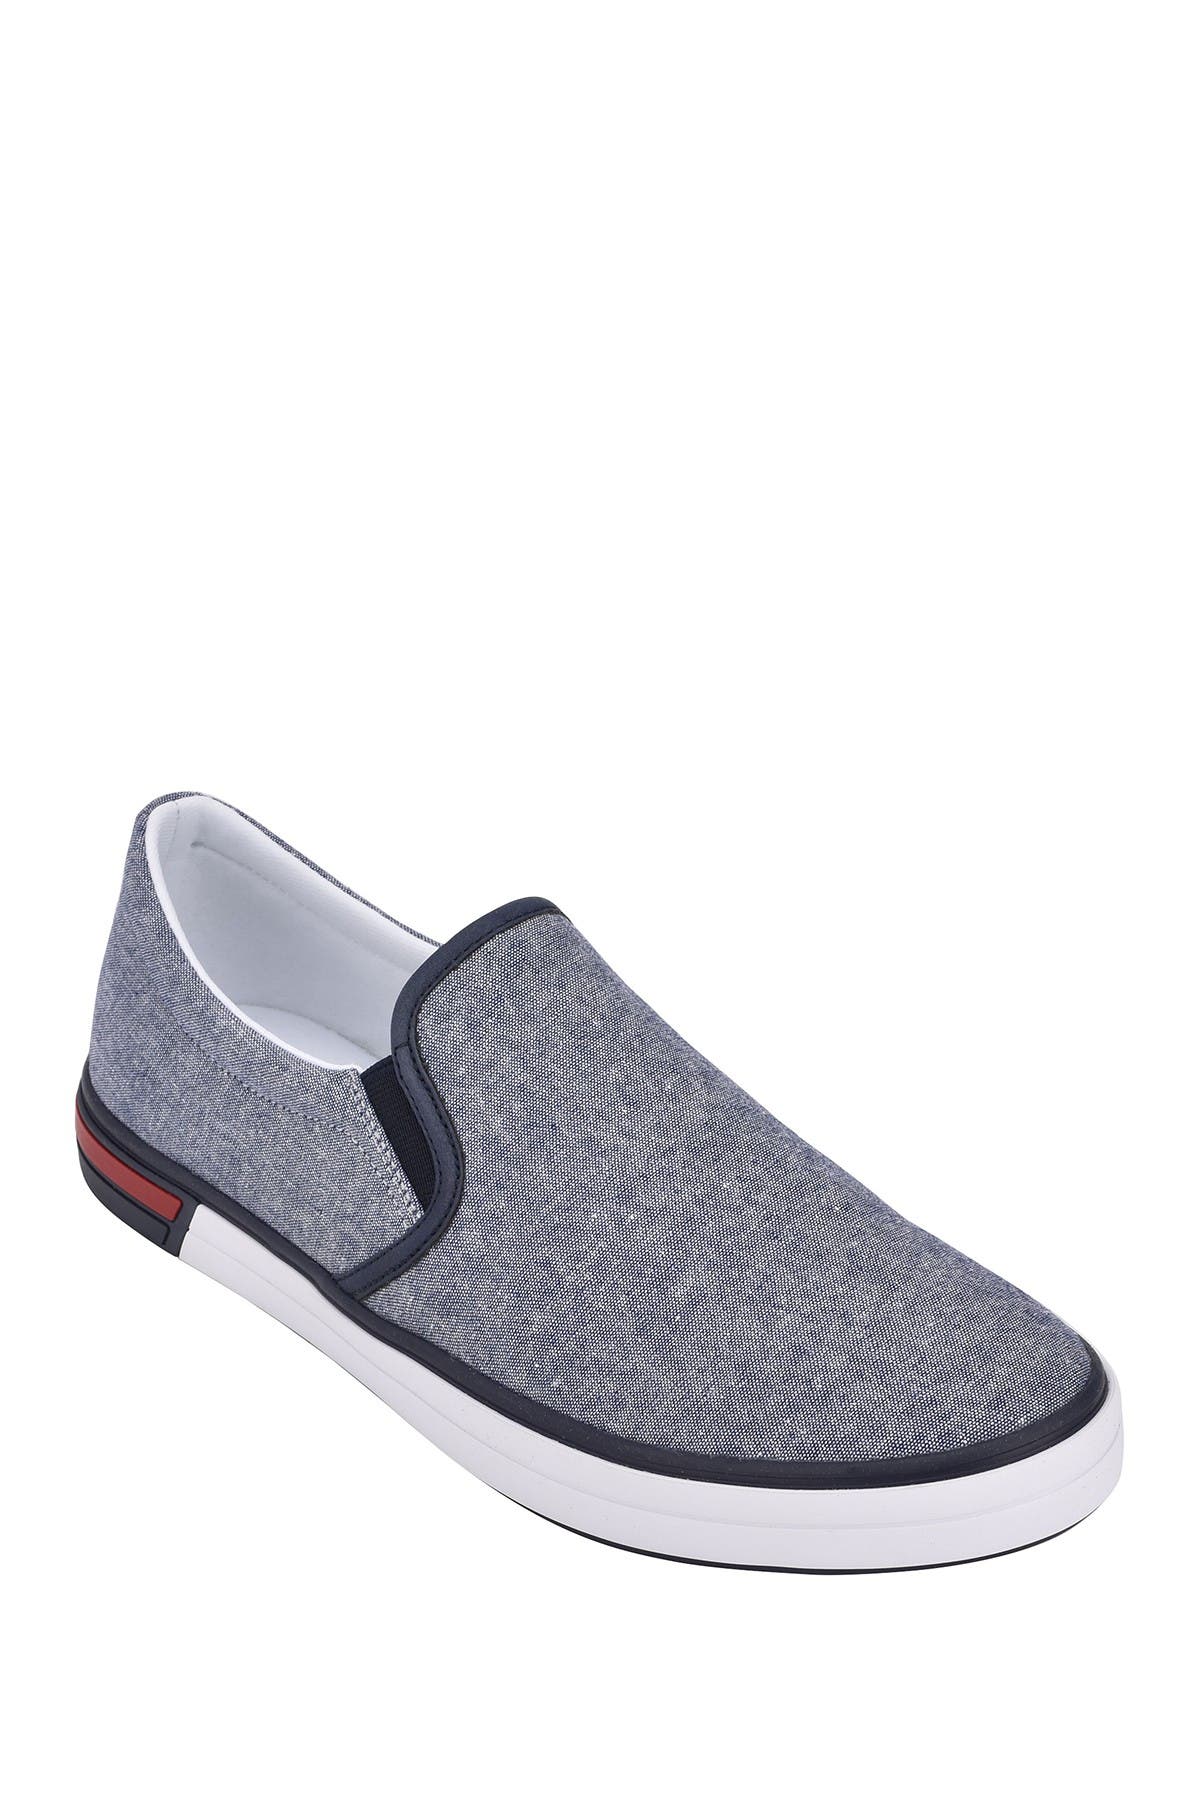 tommy hilfiger slip on sneakers